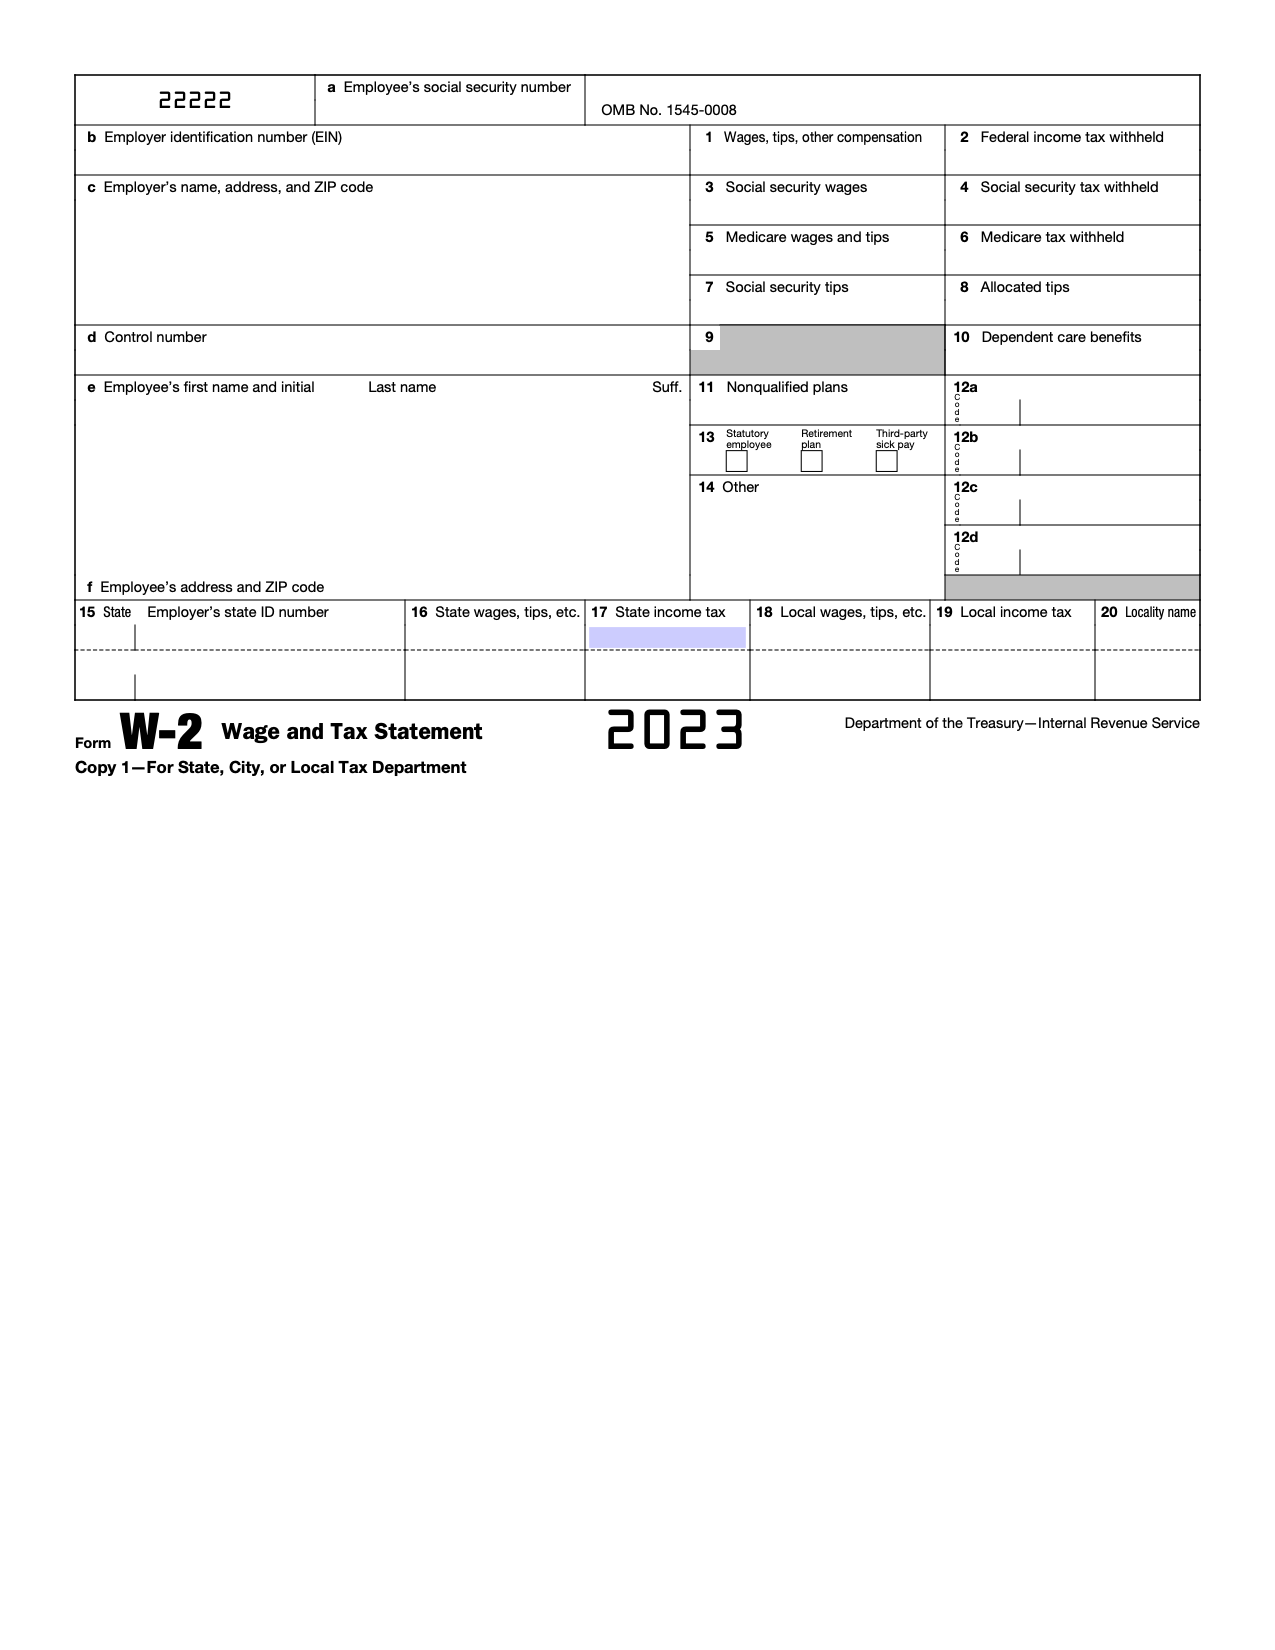 Free Irs Form W-2 | Wage And Tax Statement - Pdf – Eforms within Free Printable W2 Form 2023